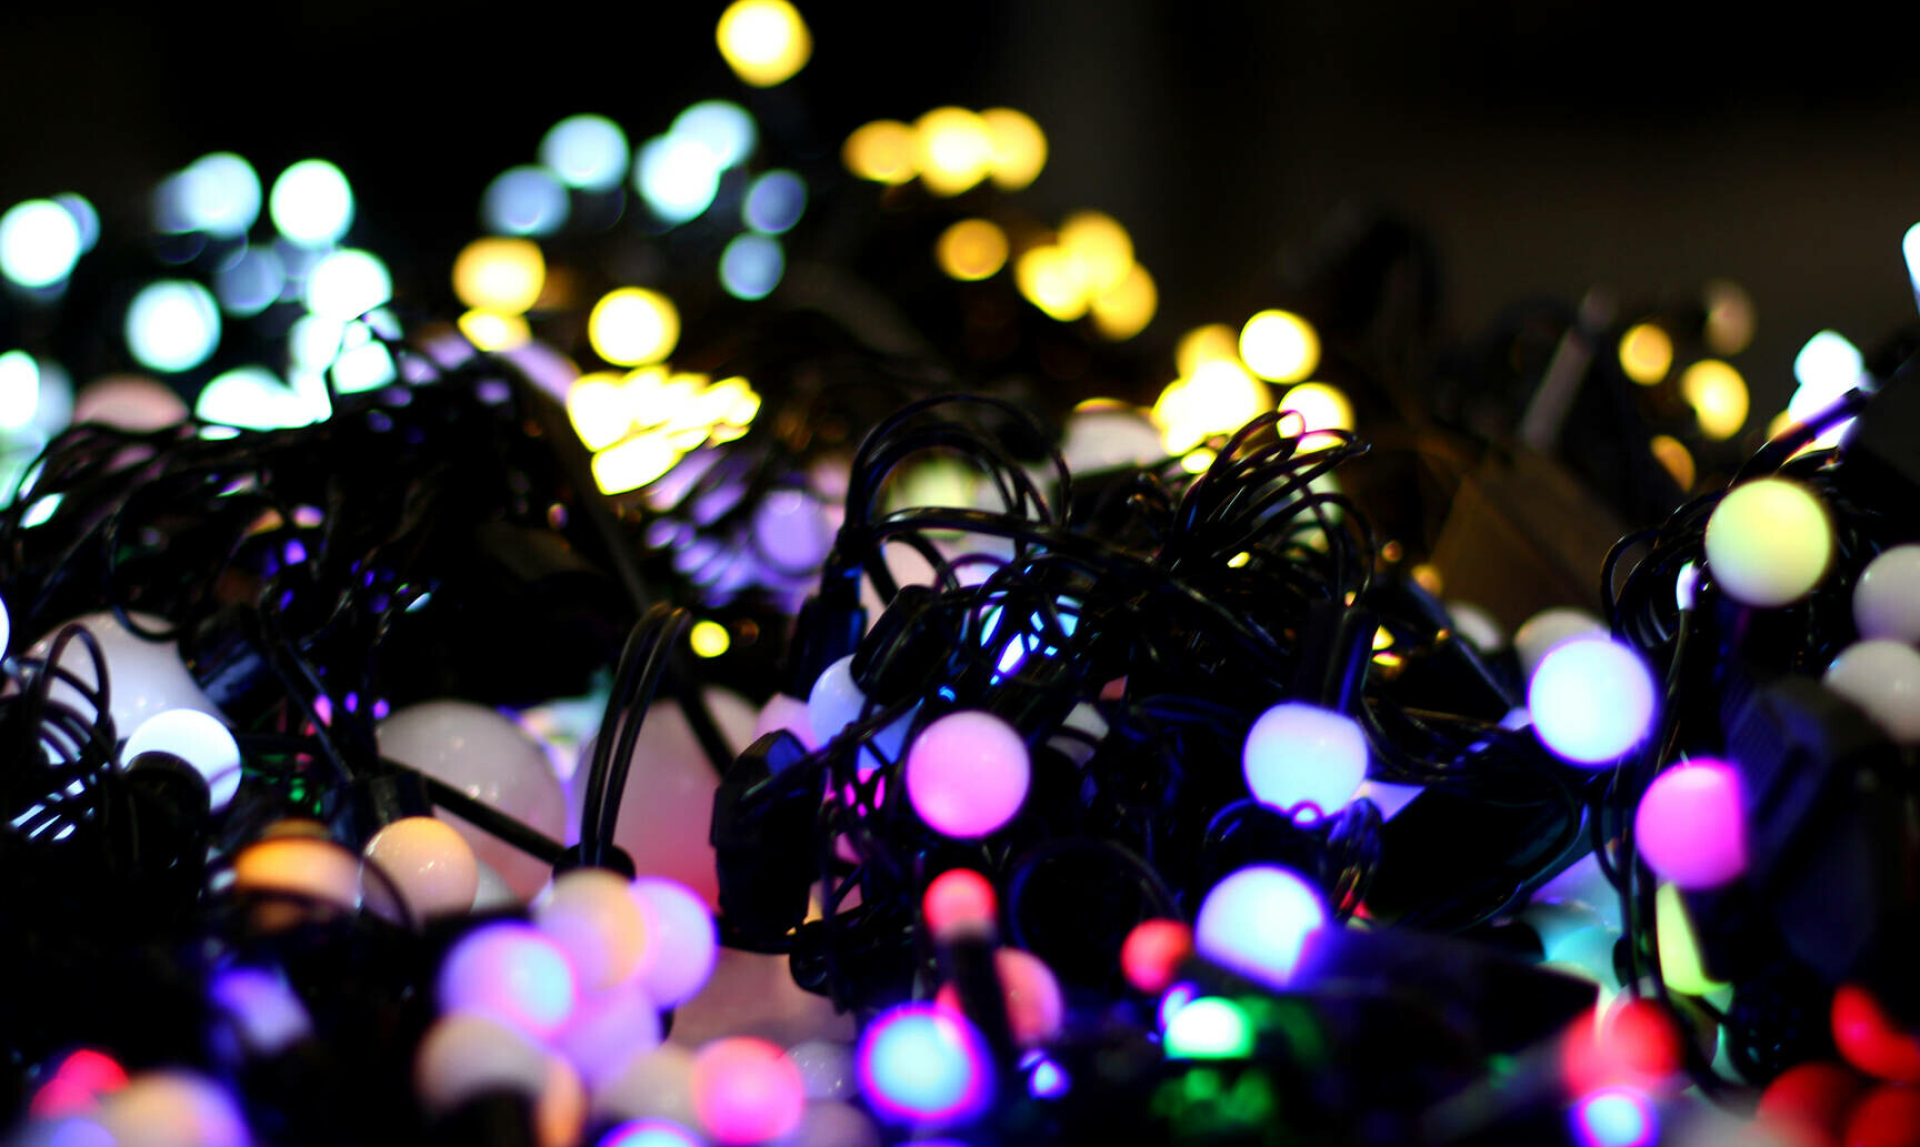 Christmas Lights: New Year garlands, Light sculptures are produced in typical holiday icons. 1920x1150 HD Wallpaper.